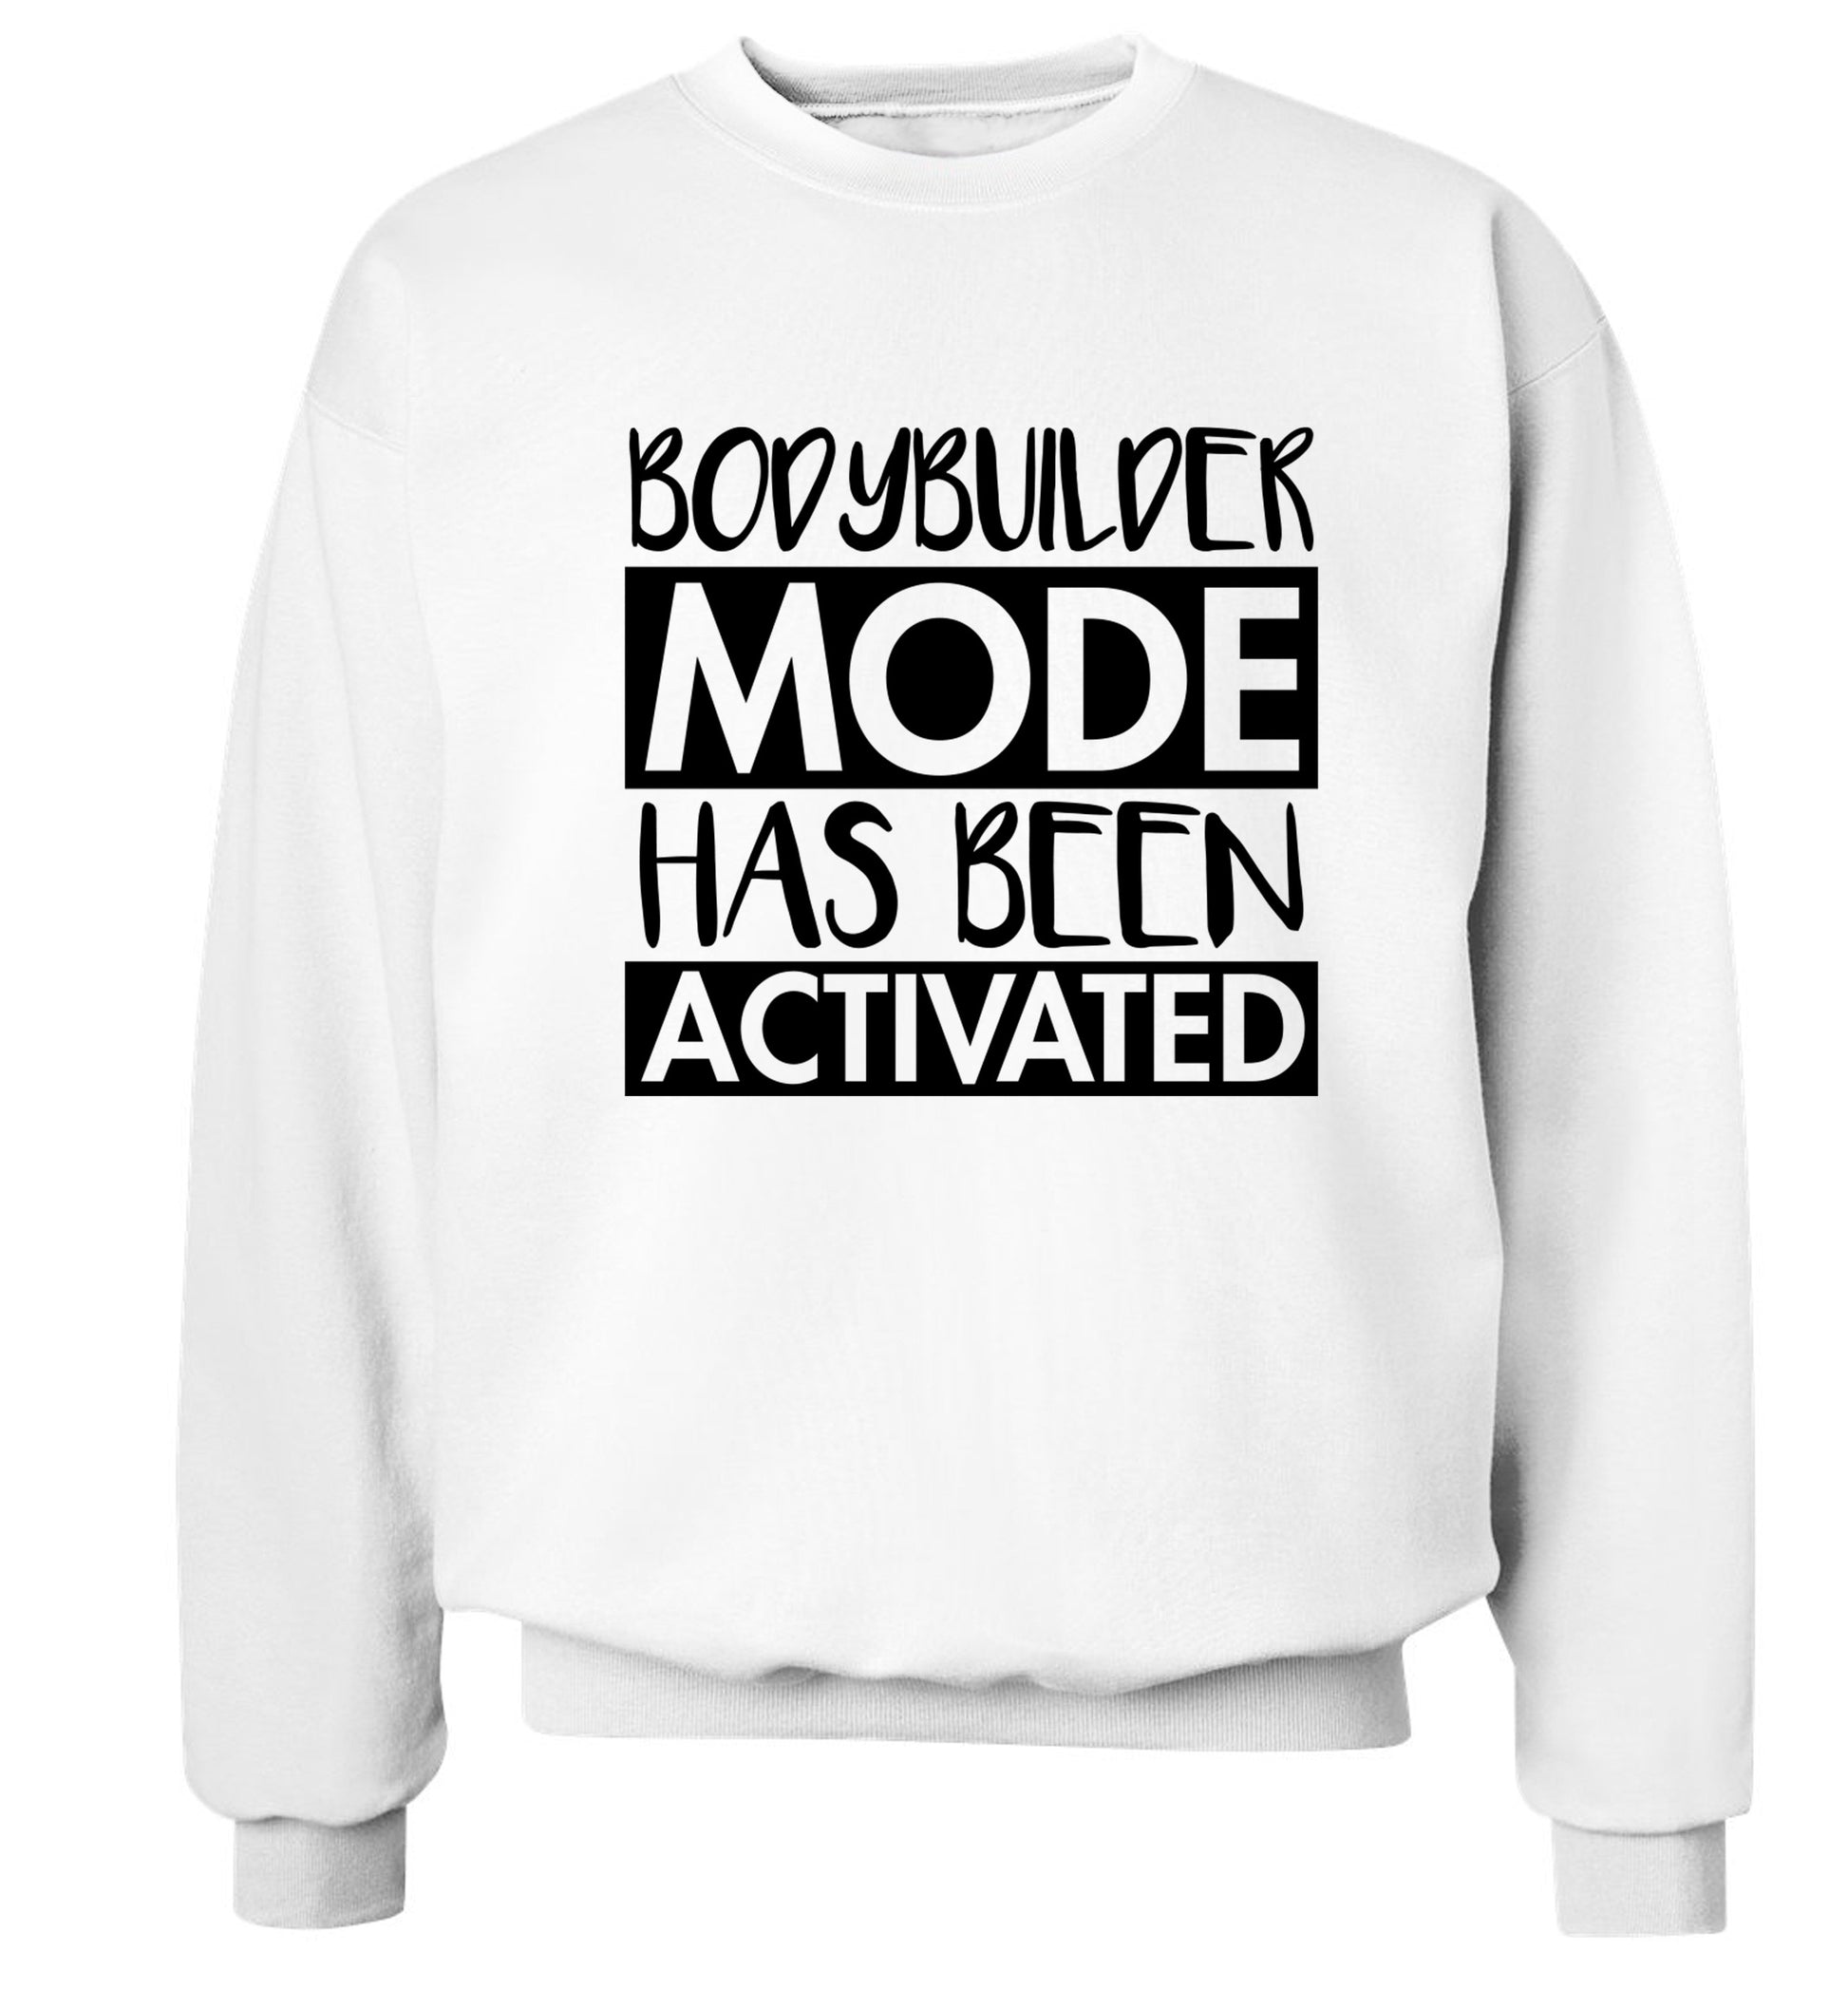 Bodybuilder mode activated Adult's unisex white Sweater 2XL